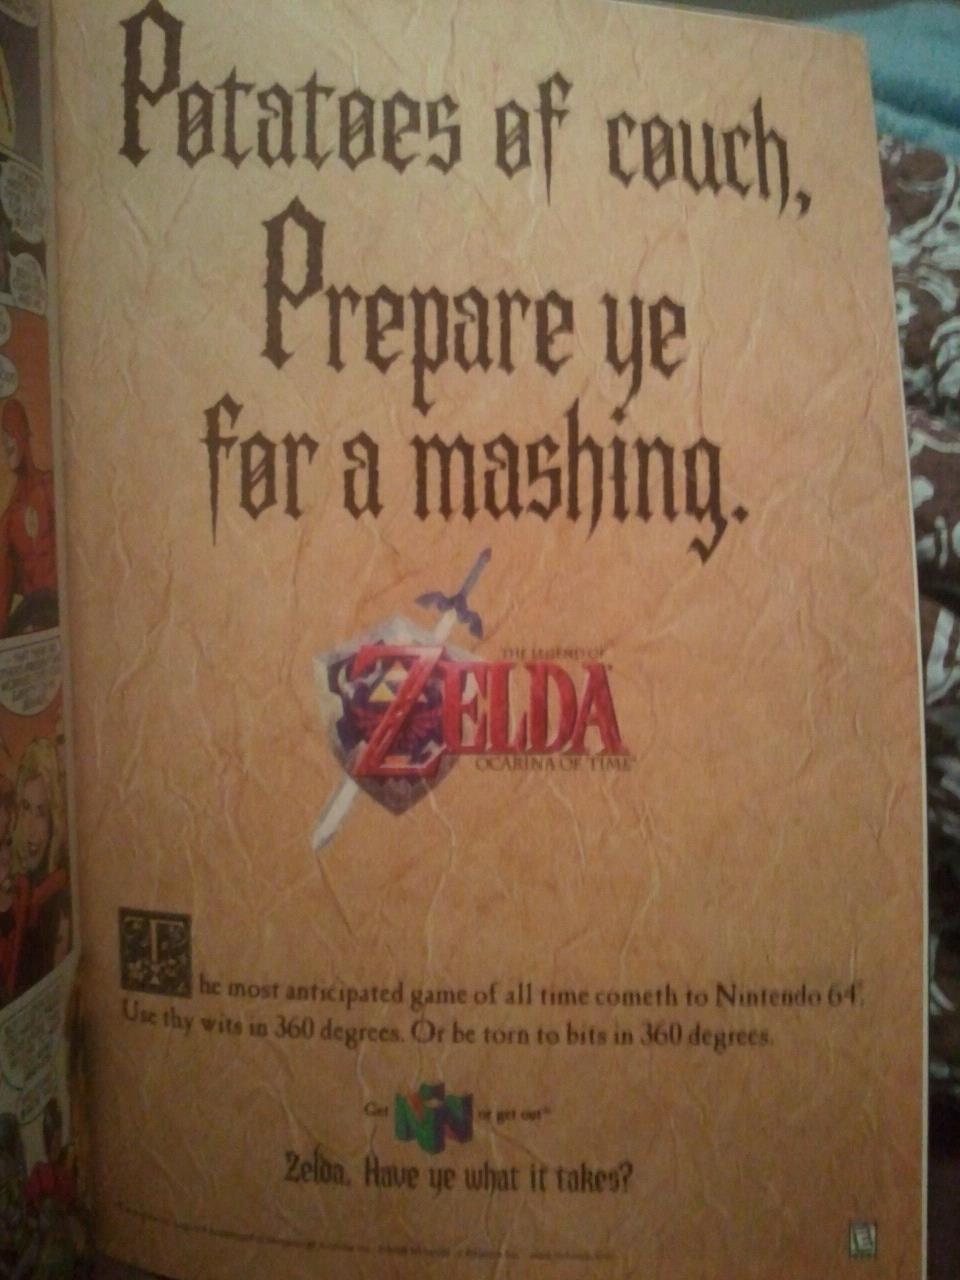 Awesome Zelda ad is Awesome